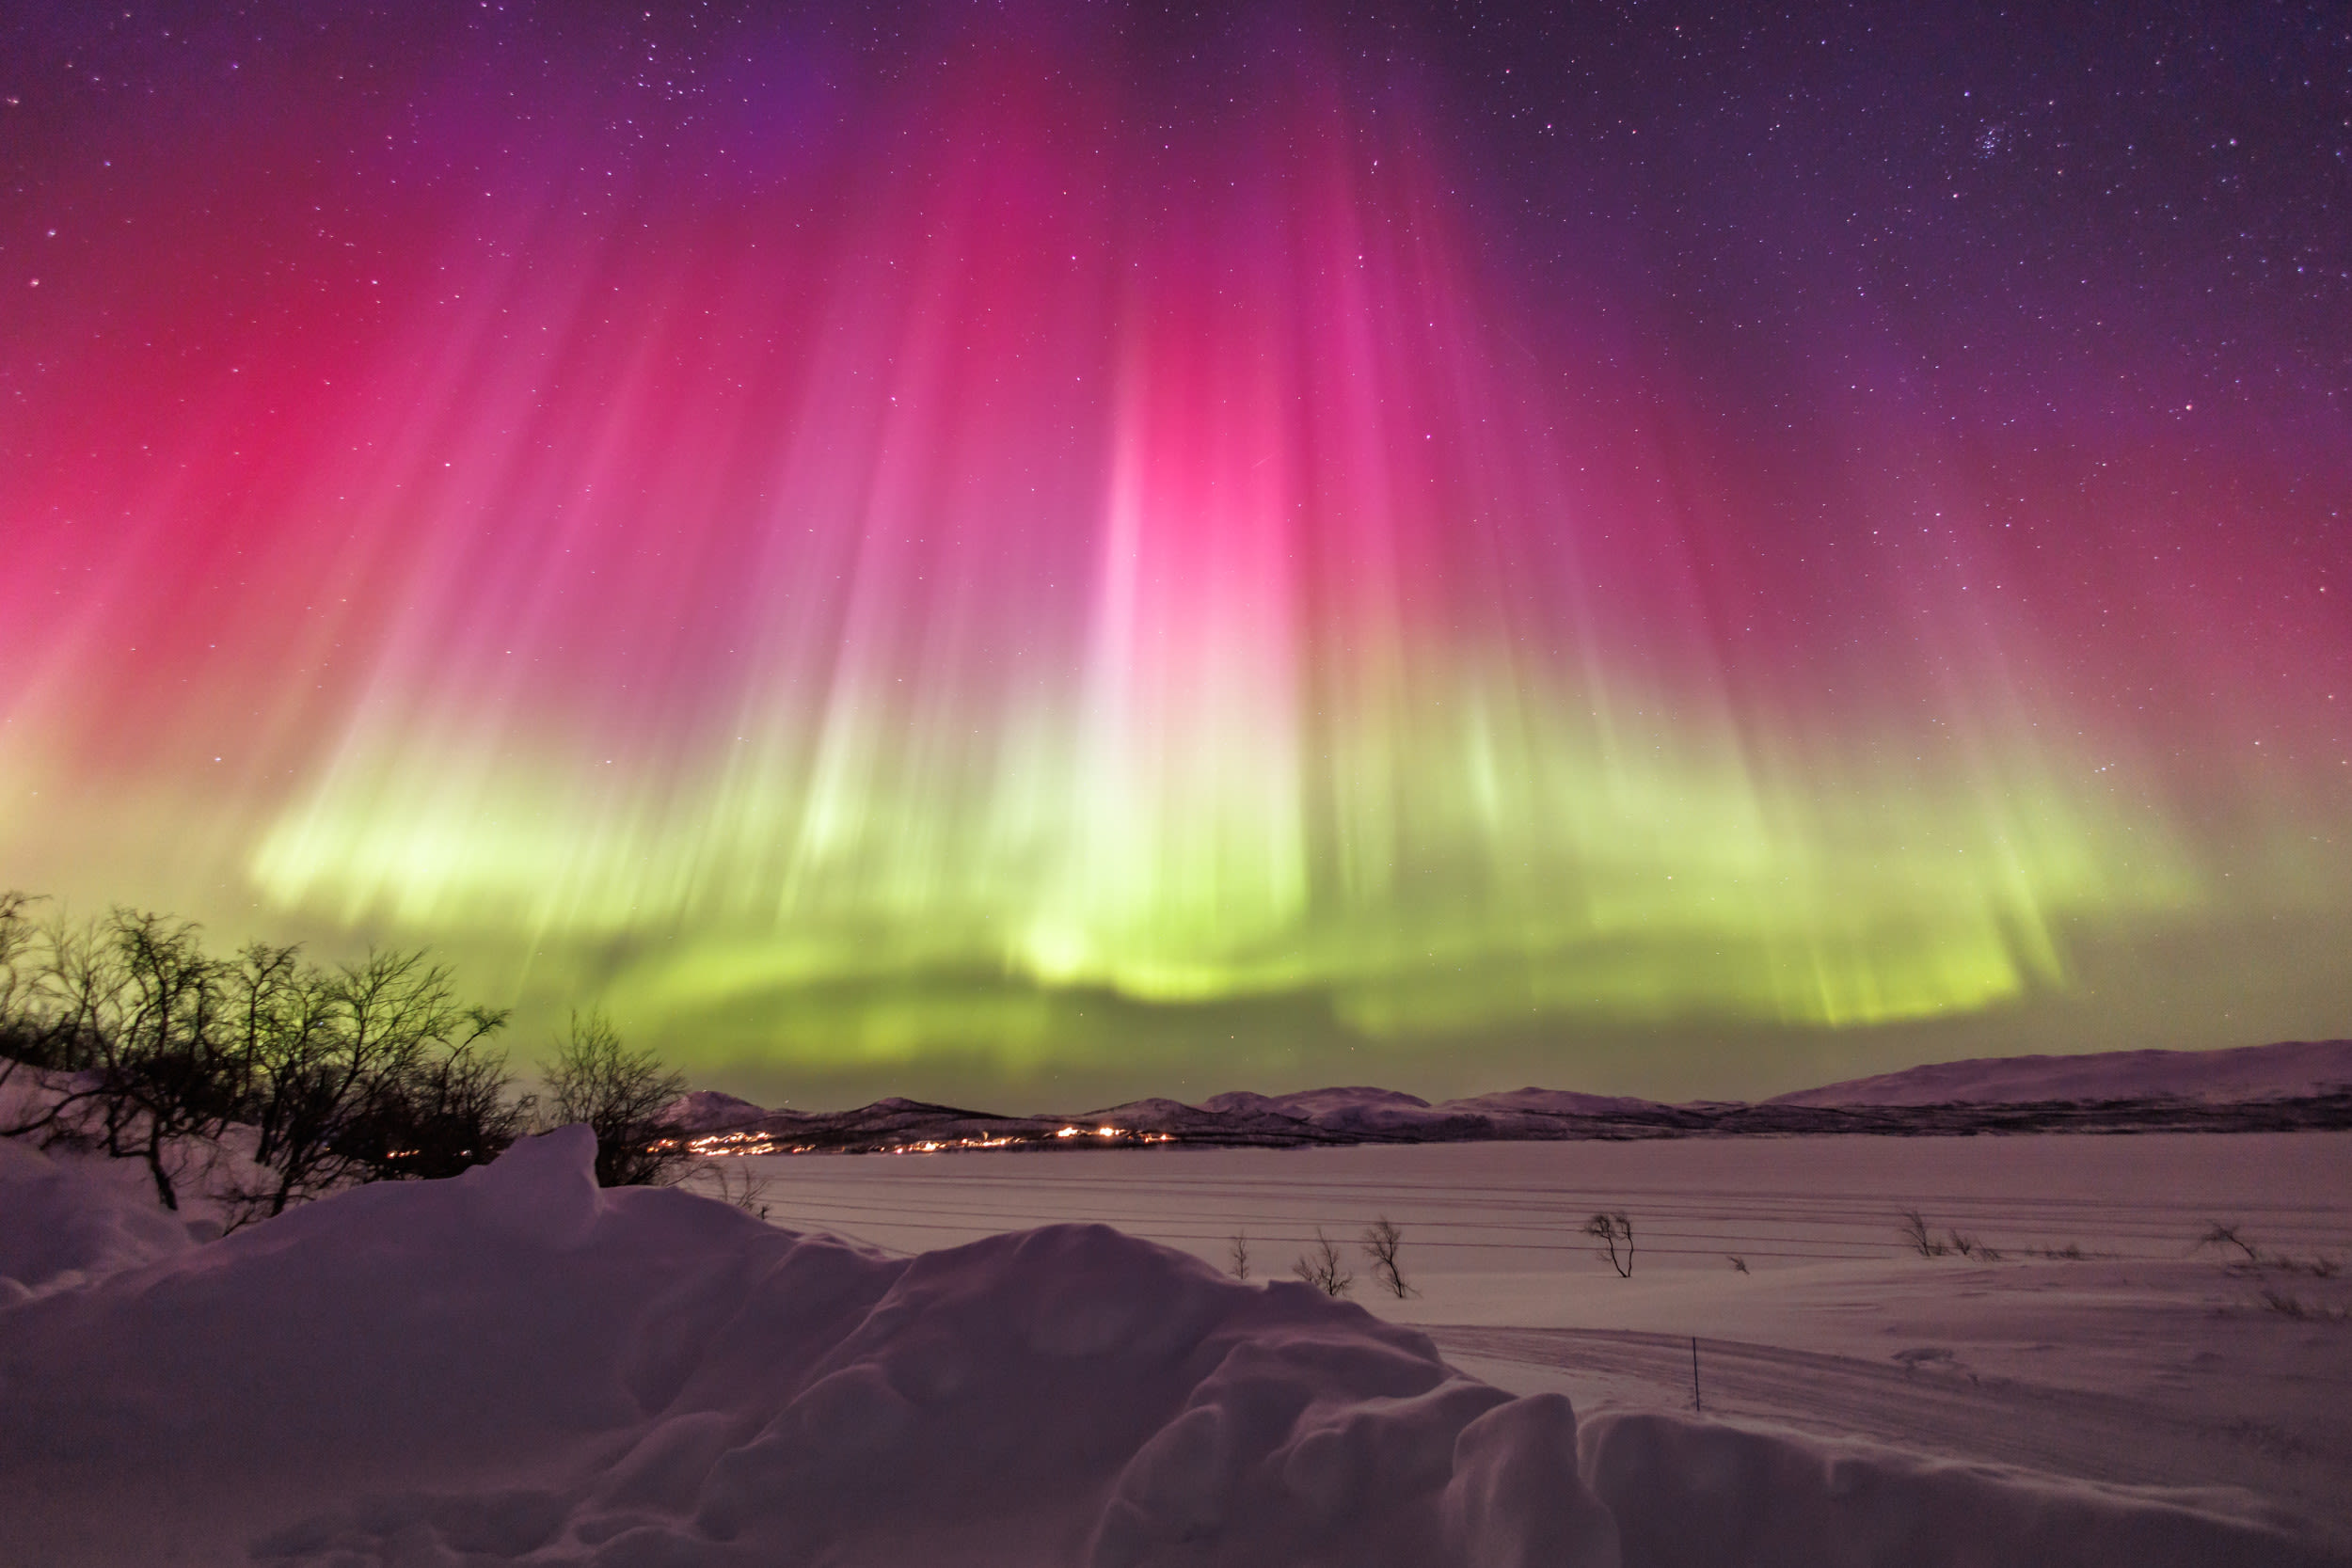 Man drives over 600 miles to capture "magical" rare red northern lights